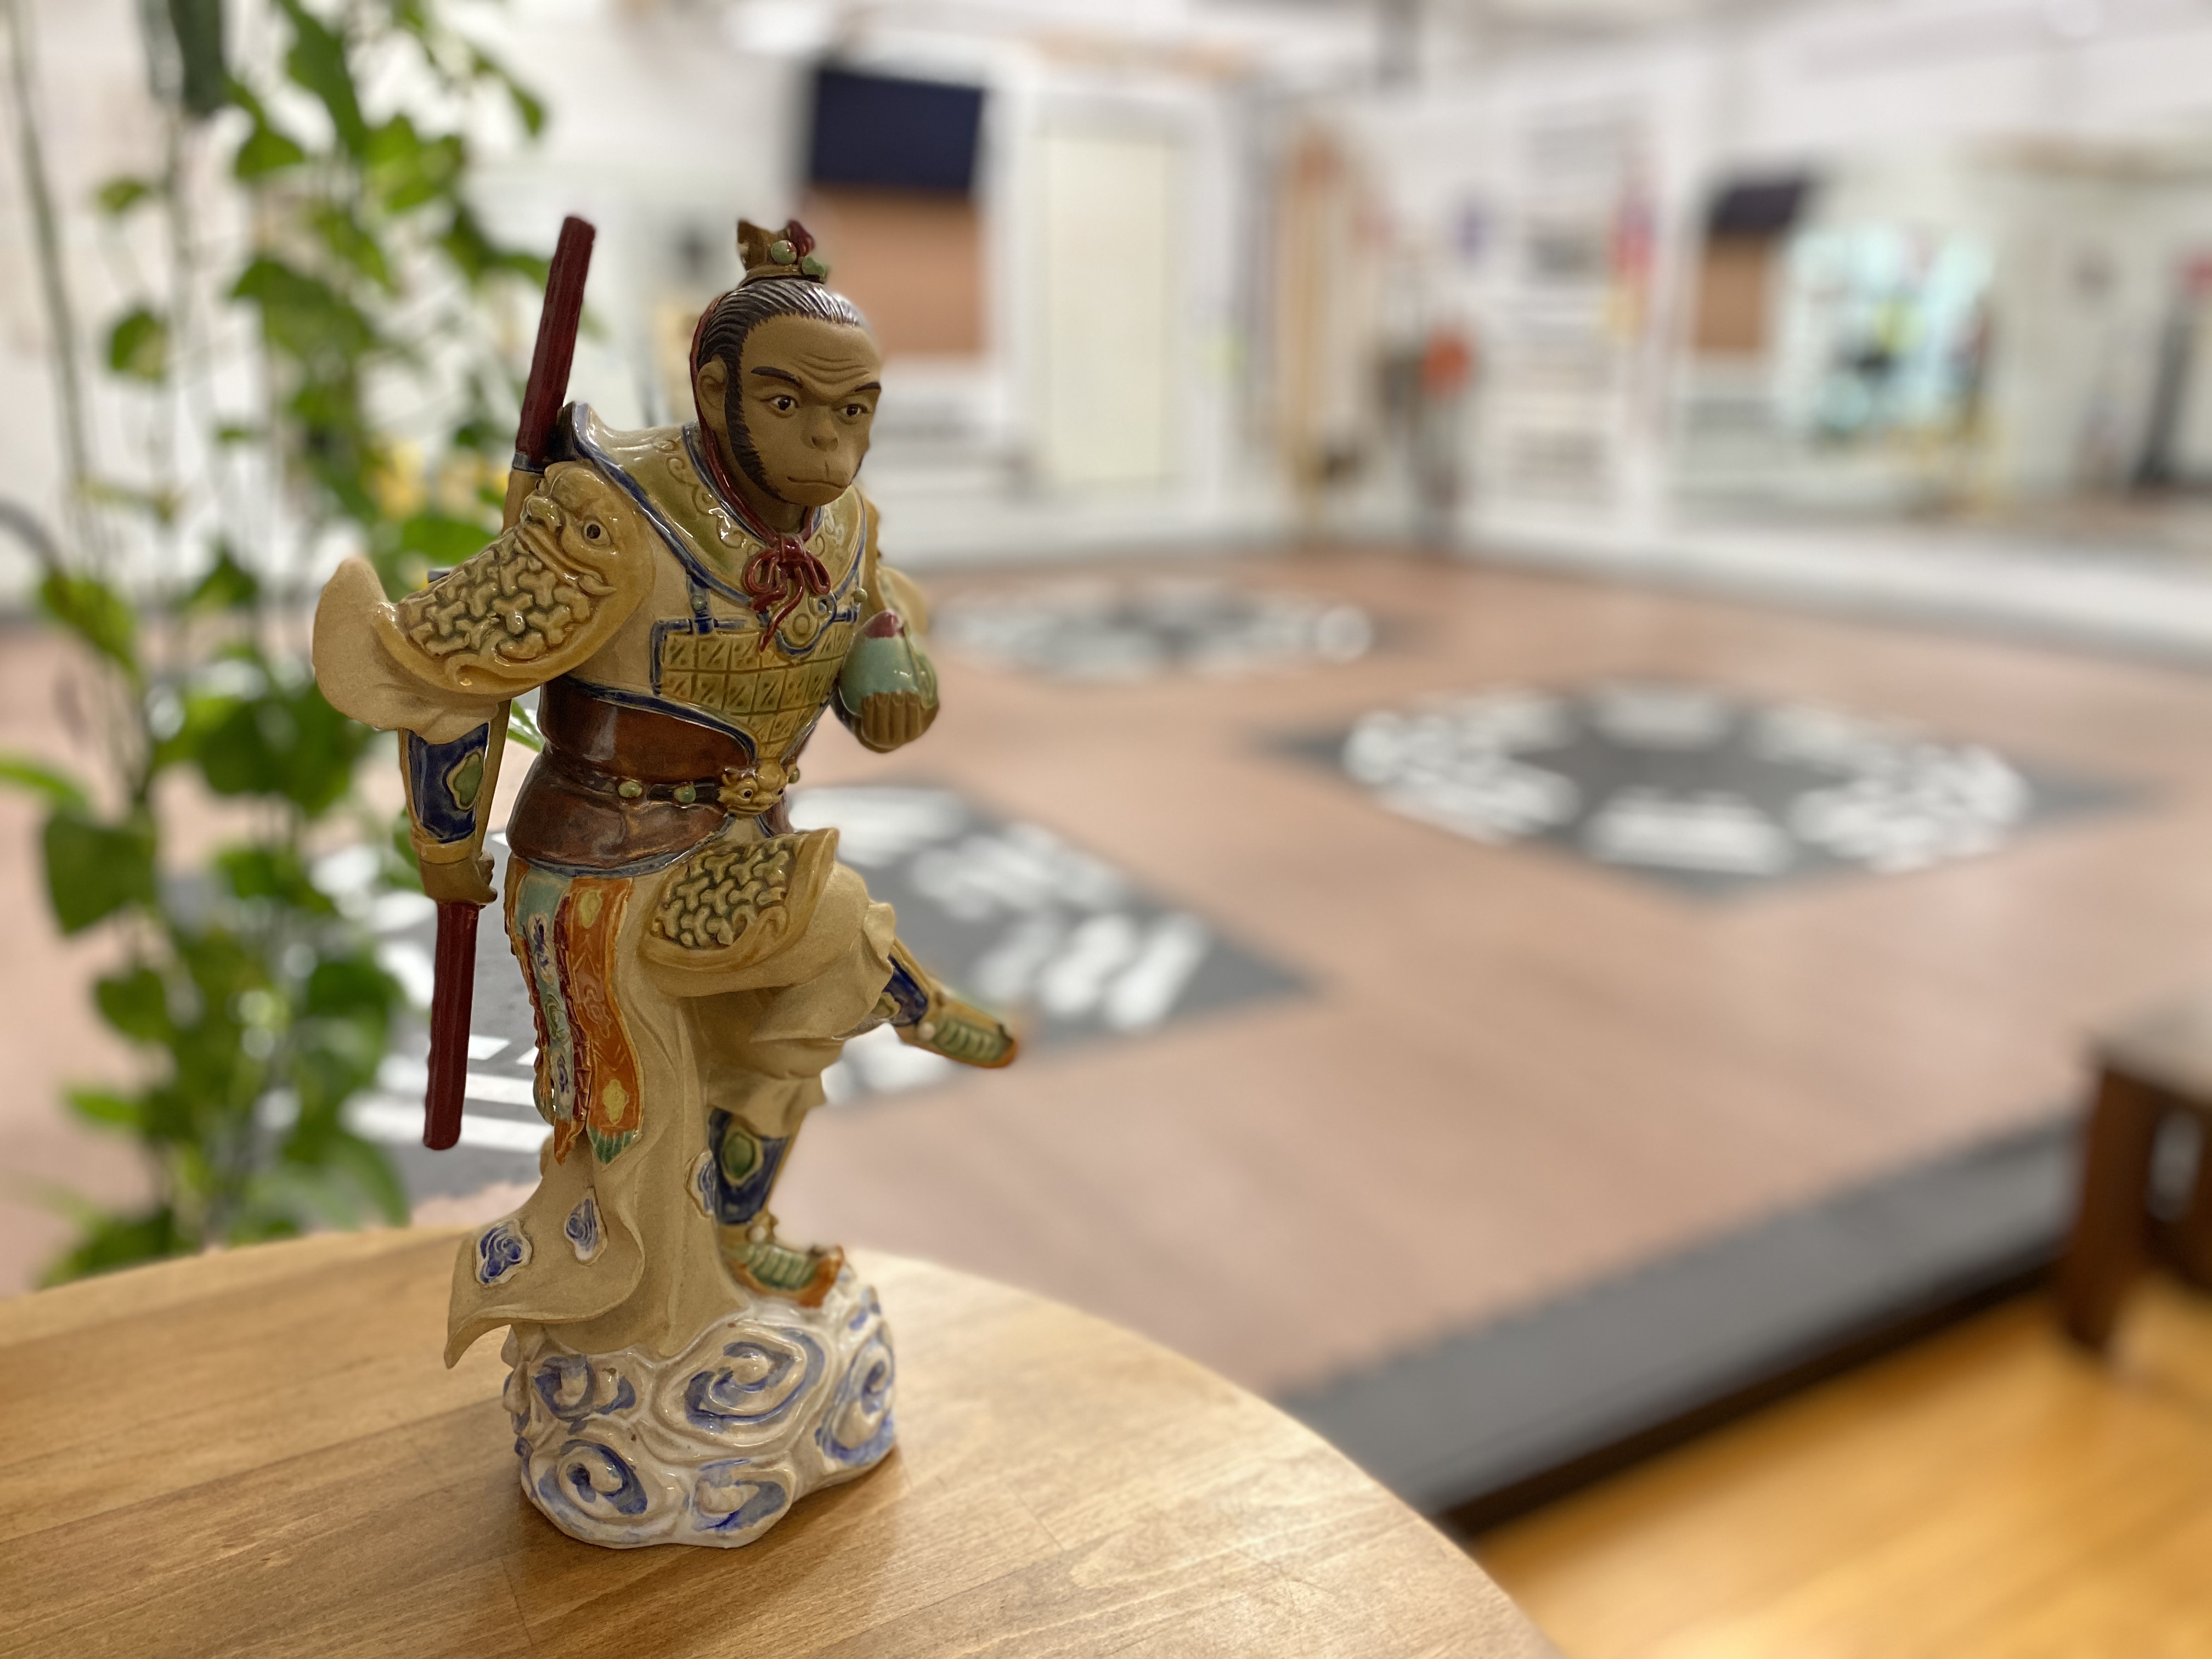 Small and detailed sculpture of the Monkey King in front of an out of focus training space.